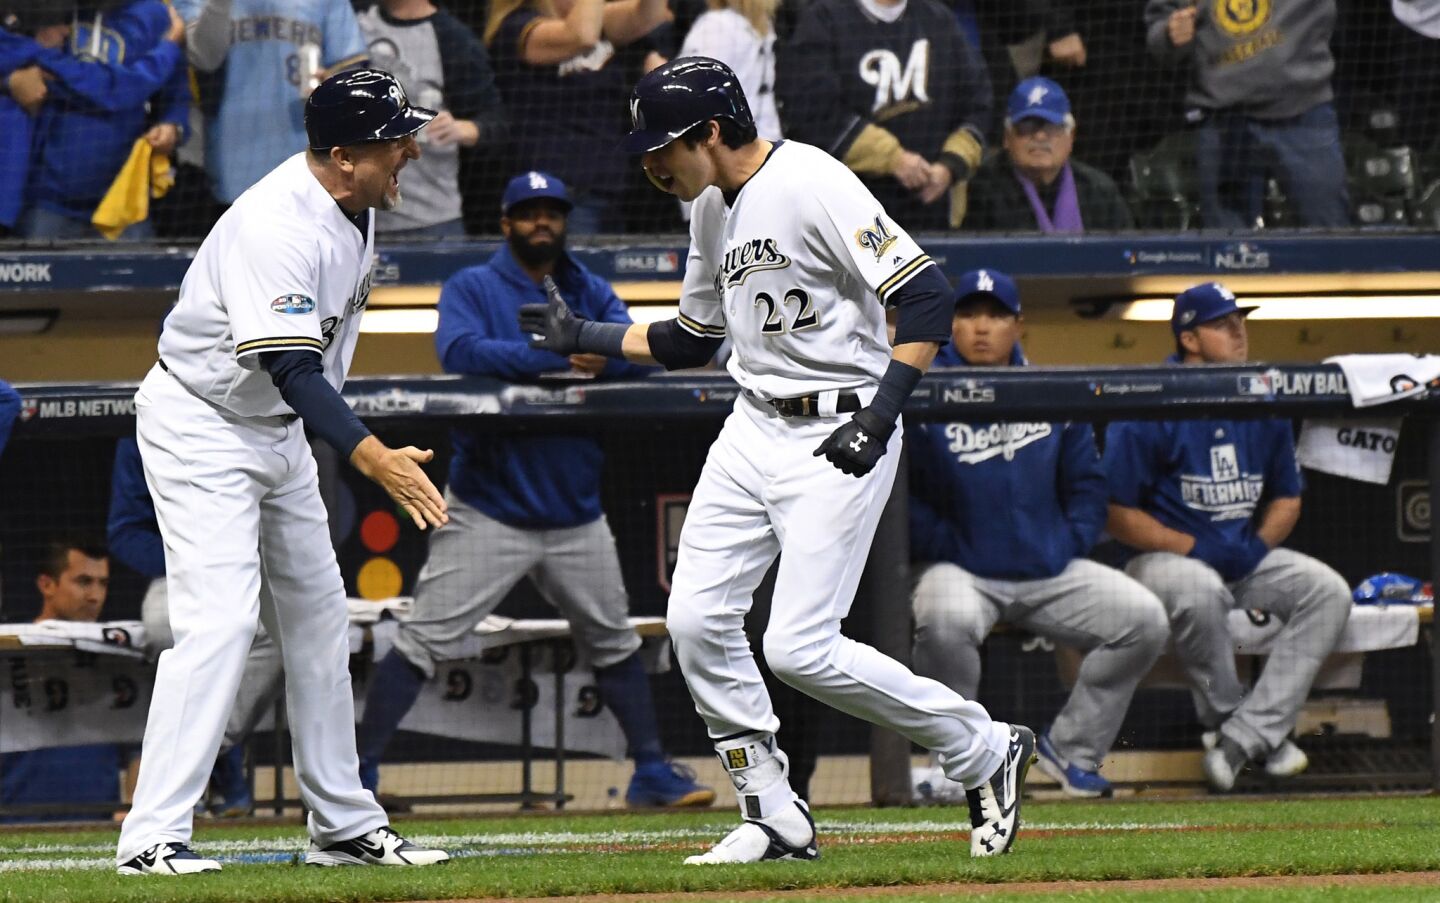 With the Dodgers looking on, Milwaukee Brewers Christian Yelich celebrates after hitting a solo homerun in the first inning.